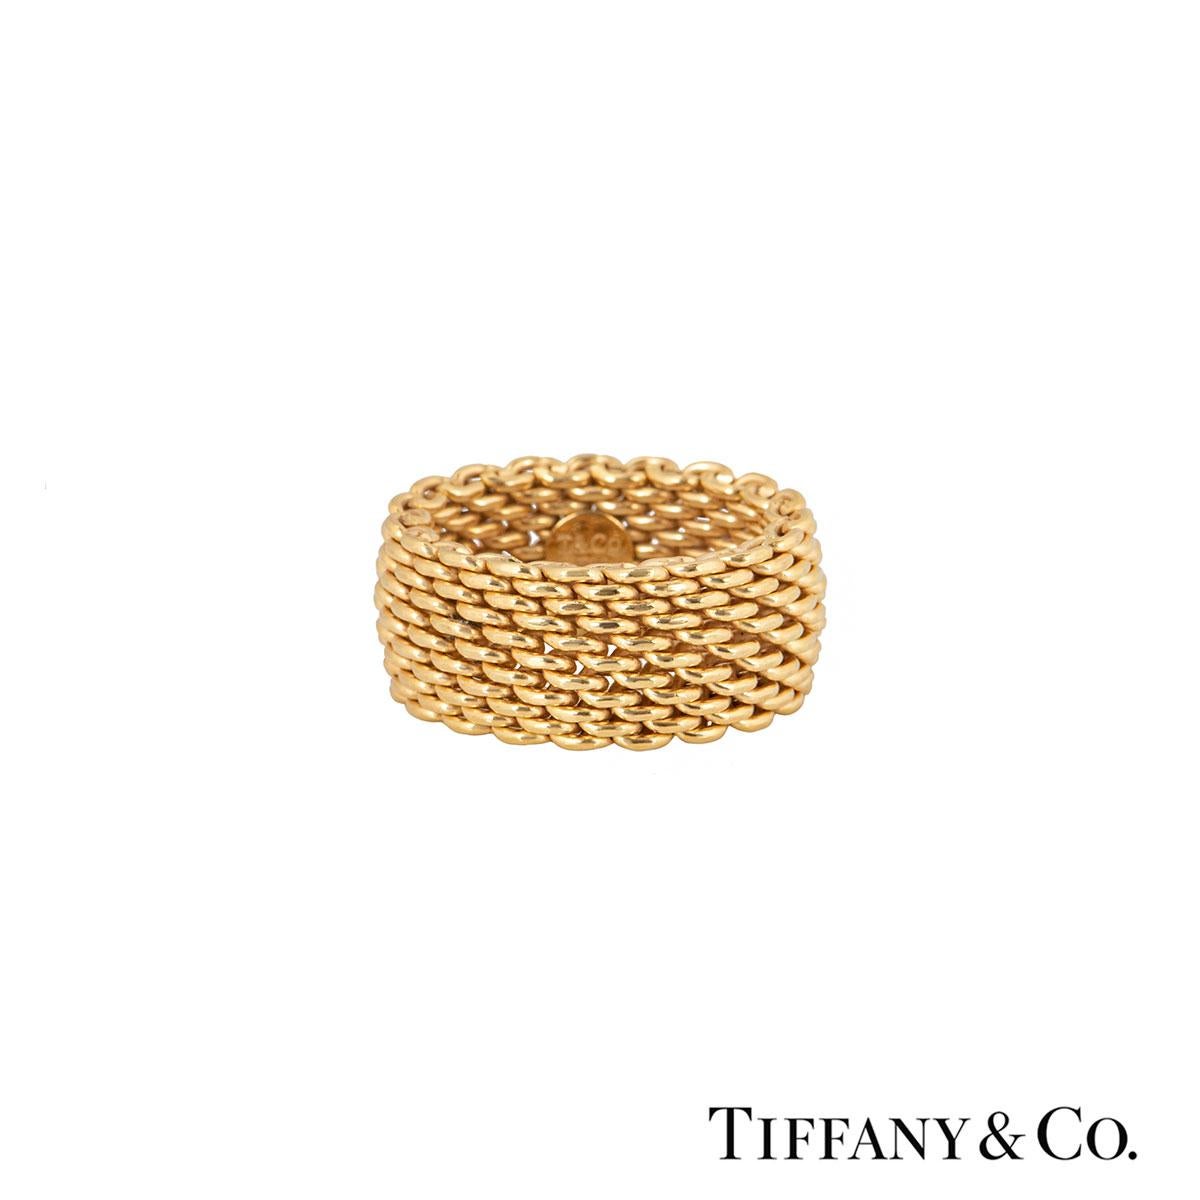 A unique 18k yellow gold Tiffany & Co. ring from the Somerset collection. The ring is made up 6 rows of intertwined woven links. The ring measures 10mm in width and is flexible. The ring is a size UK N½, US 6 3/4, and has a gross weight of 12.70